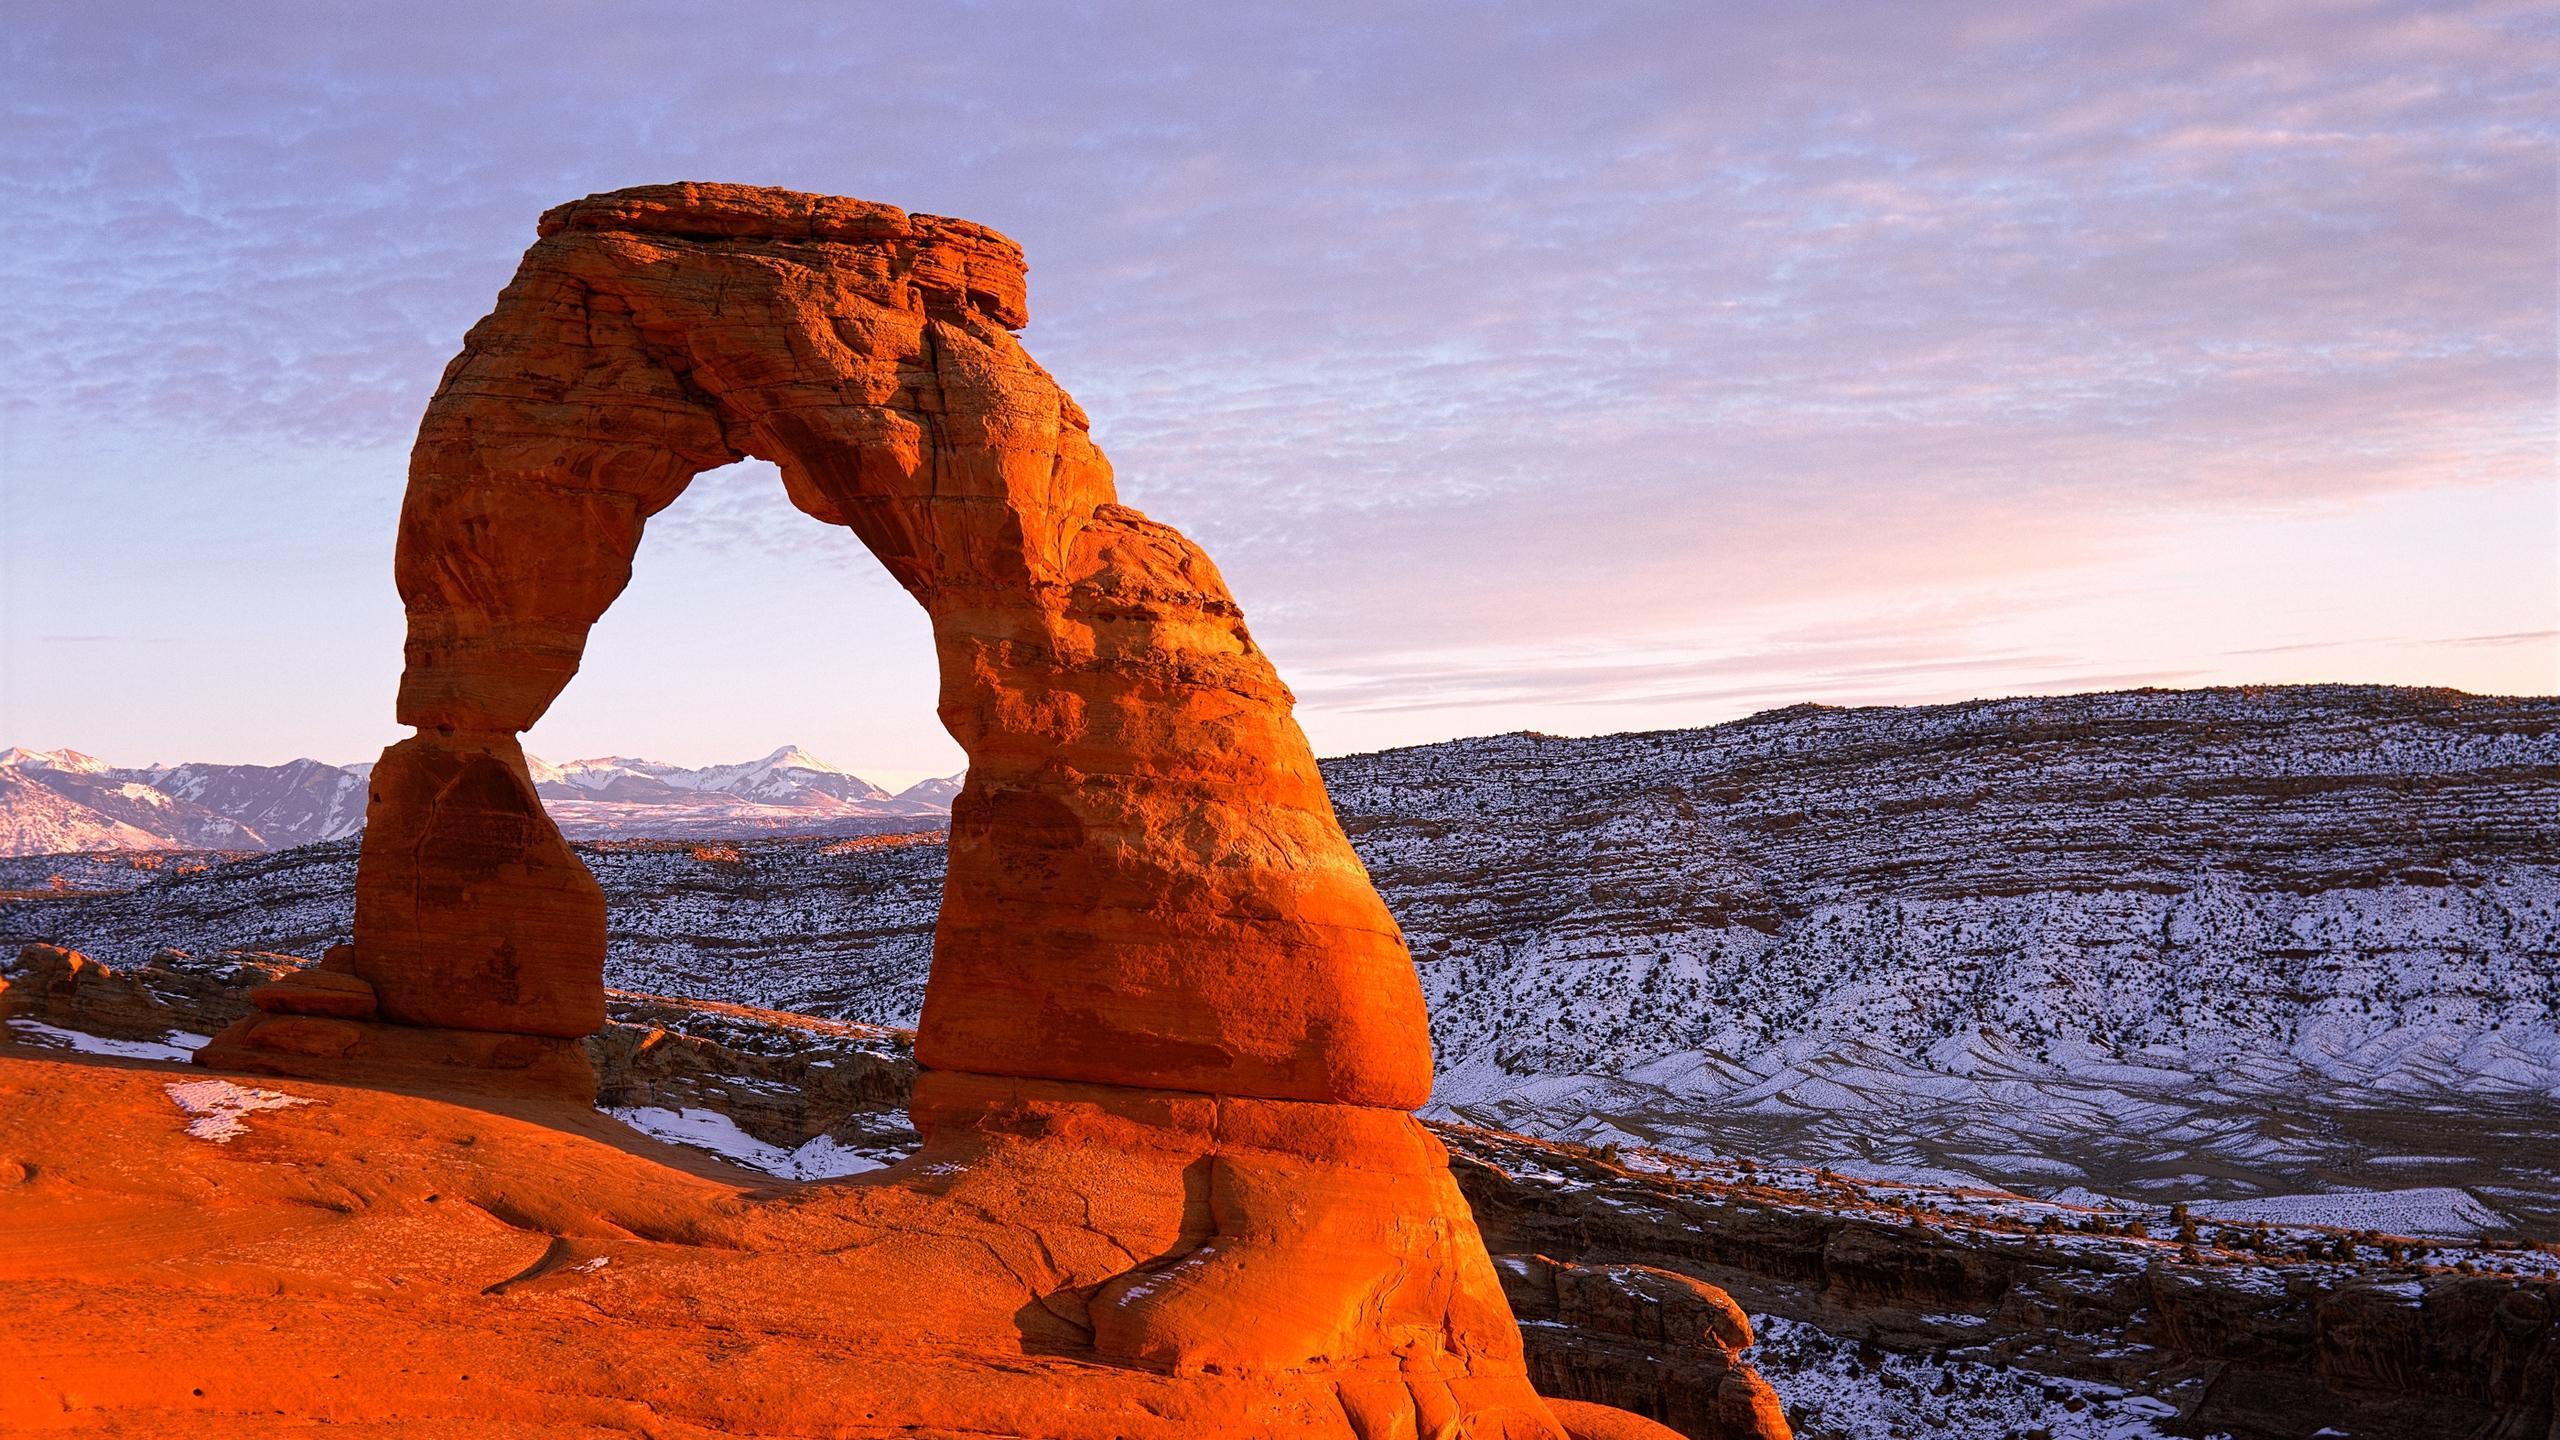 Download wallpaper 2560x1440 delicate arch, arches, national